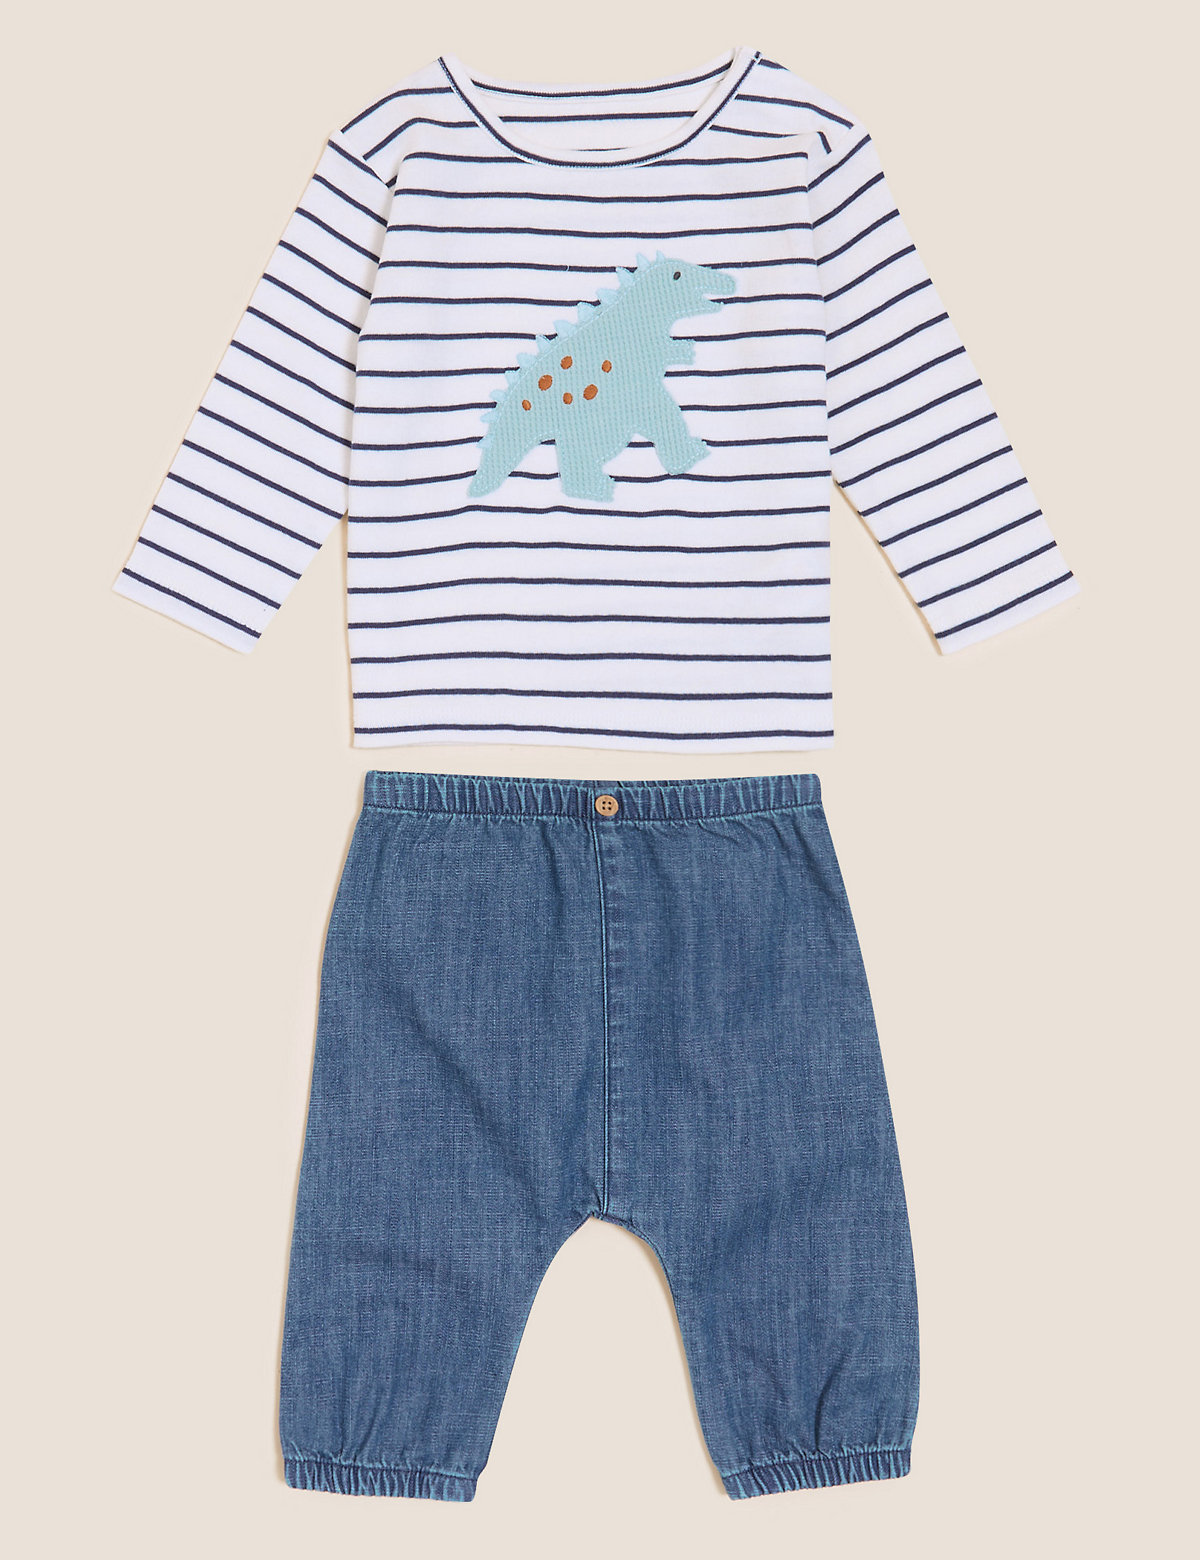 2pc Pure Cotton Striped Dinosaur Outfit (0-3 Yrs)